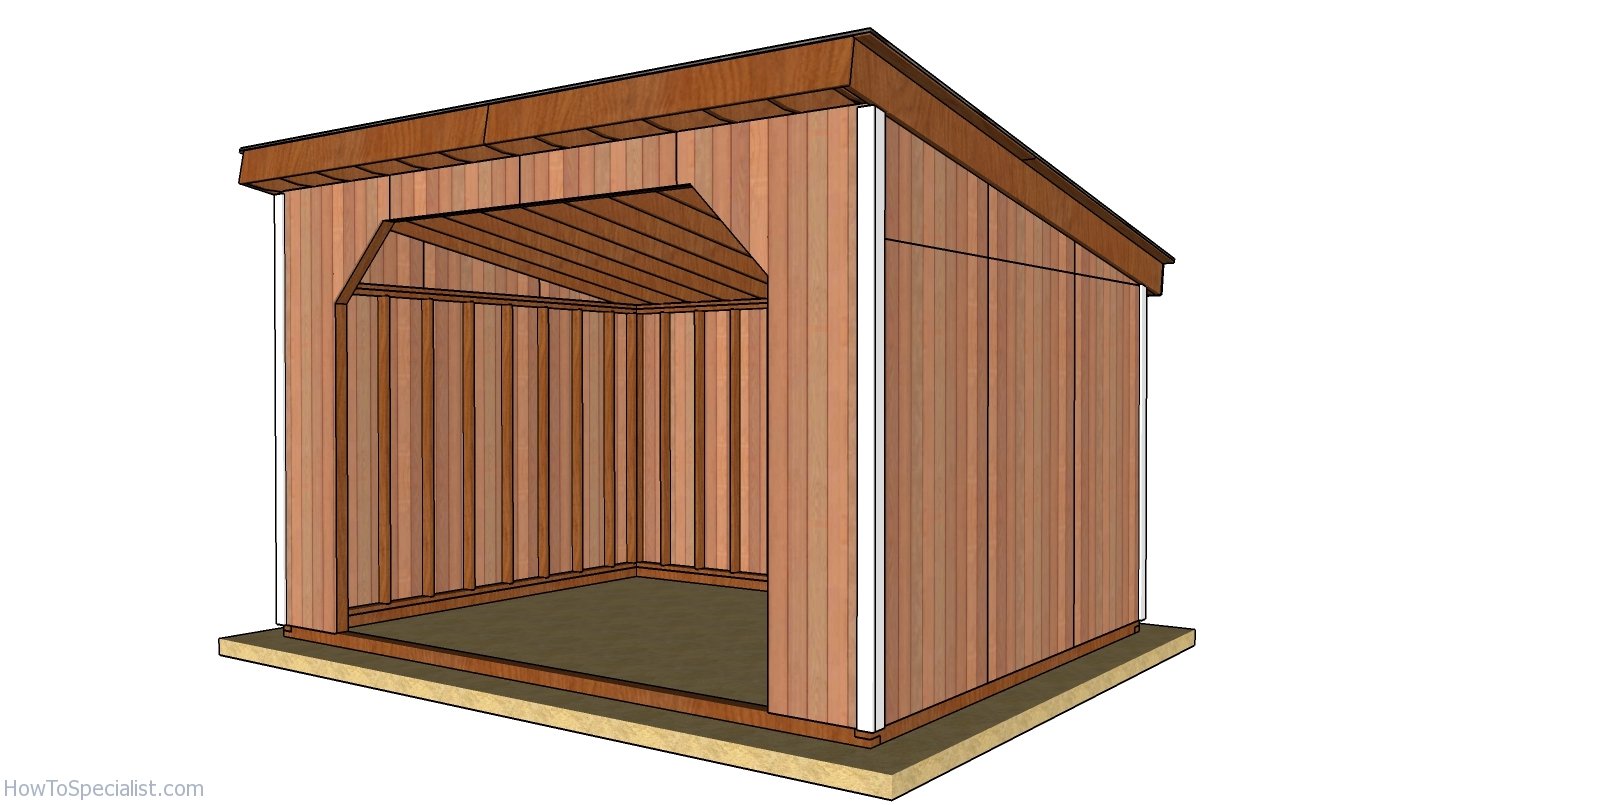 How to build a 12x16 run in shed